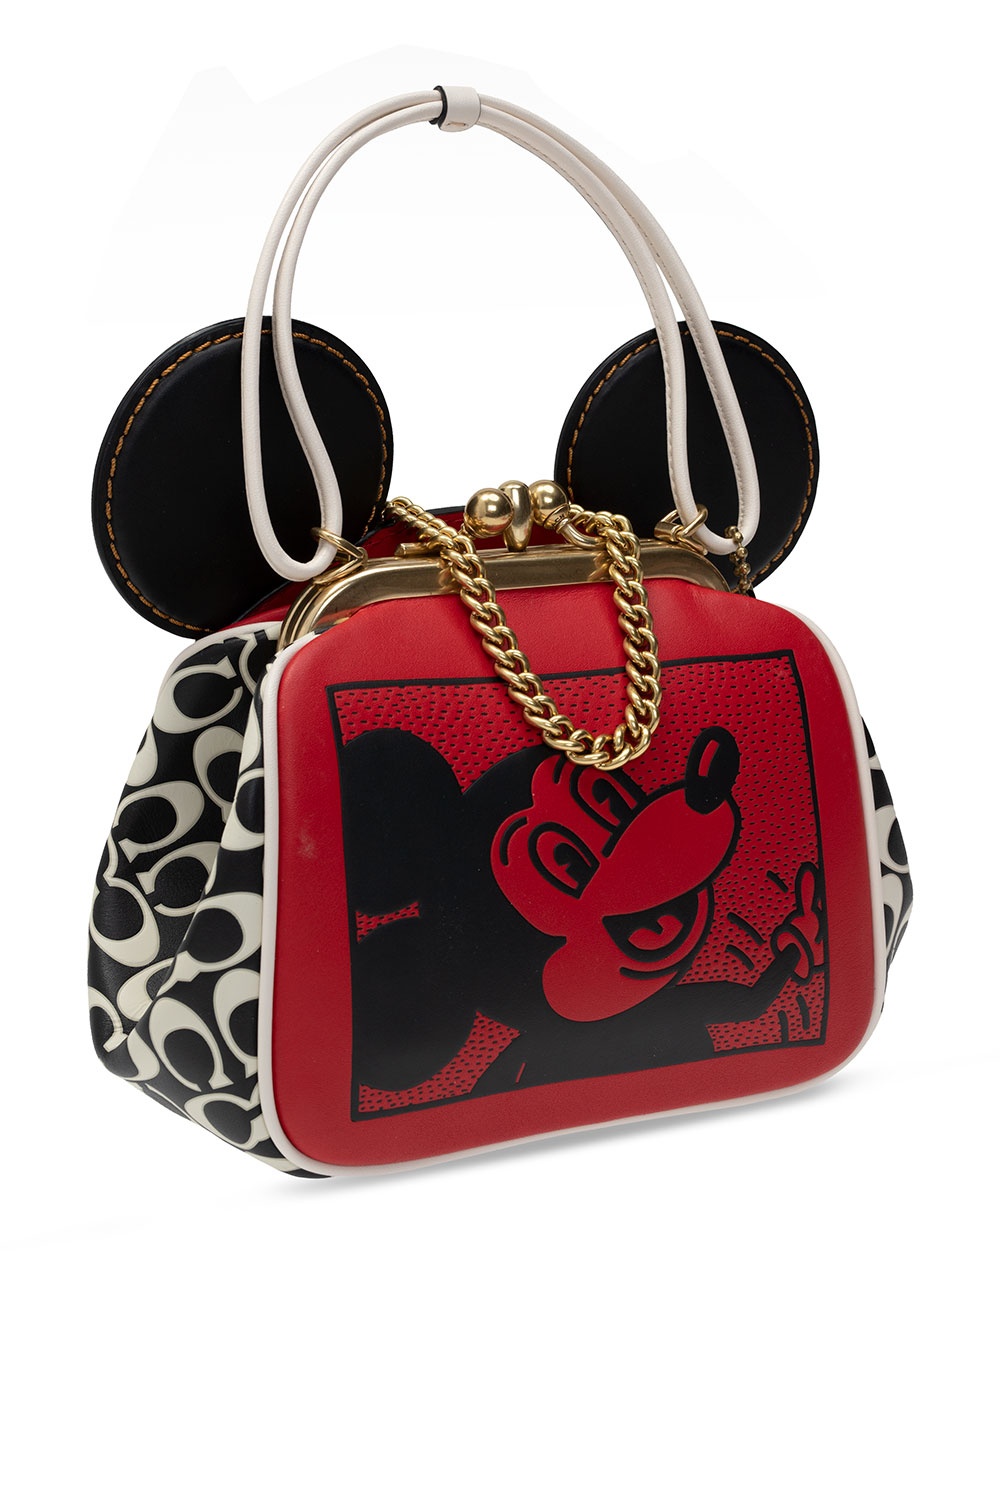 Coach Mickey Mouse x Keith Haring Kisslock Bag Black in